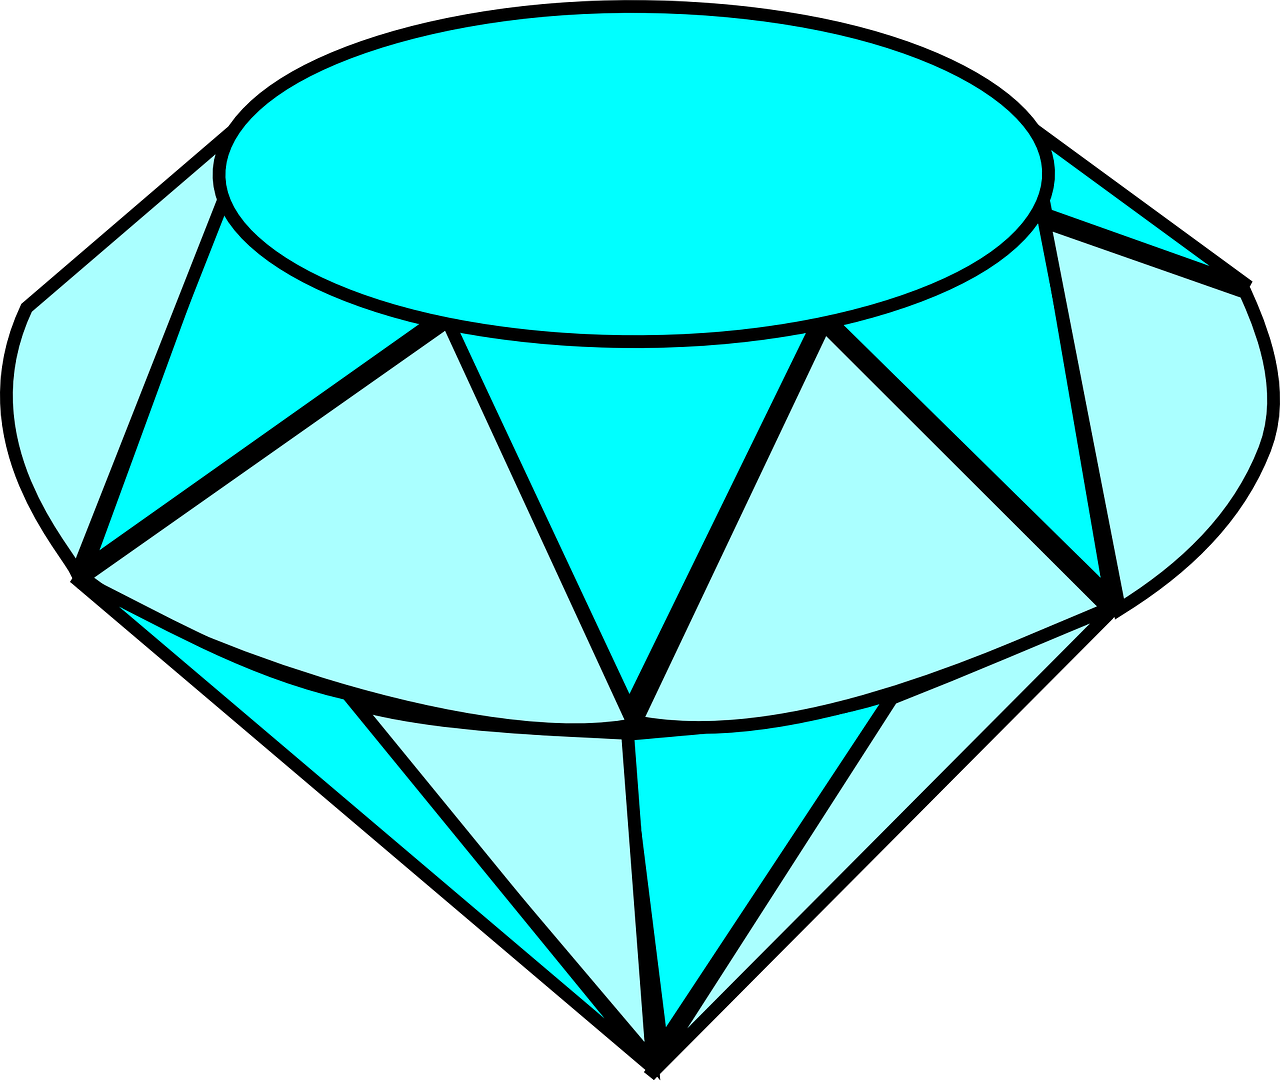 A Diamond With A Black Background PNG